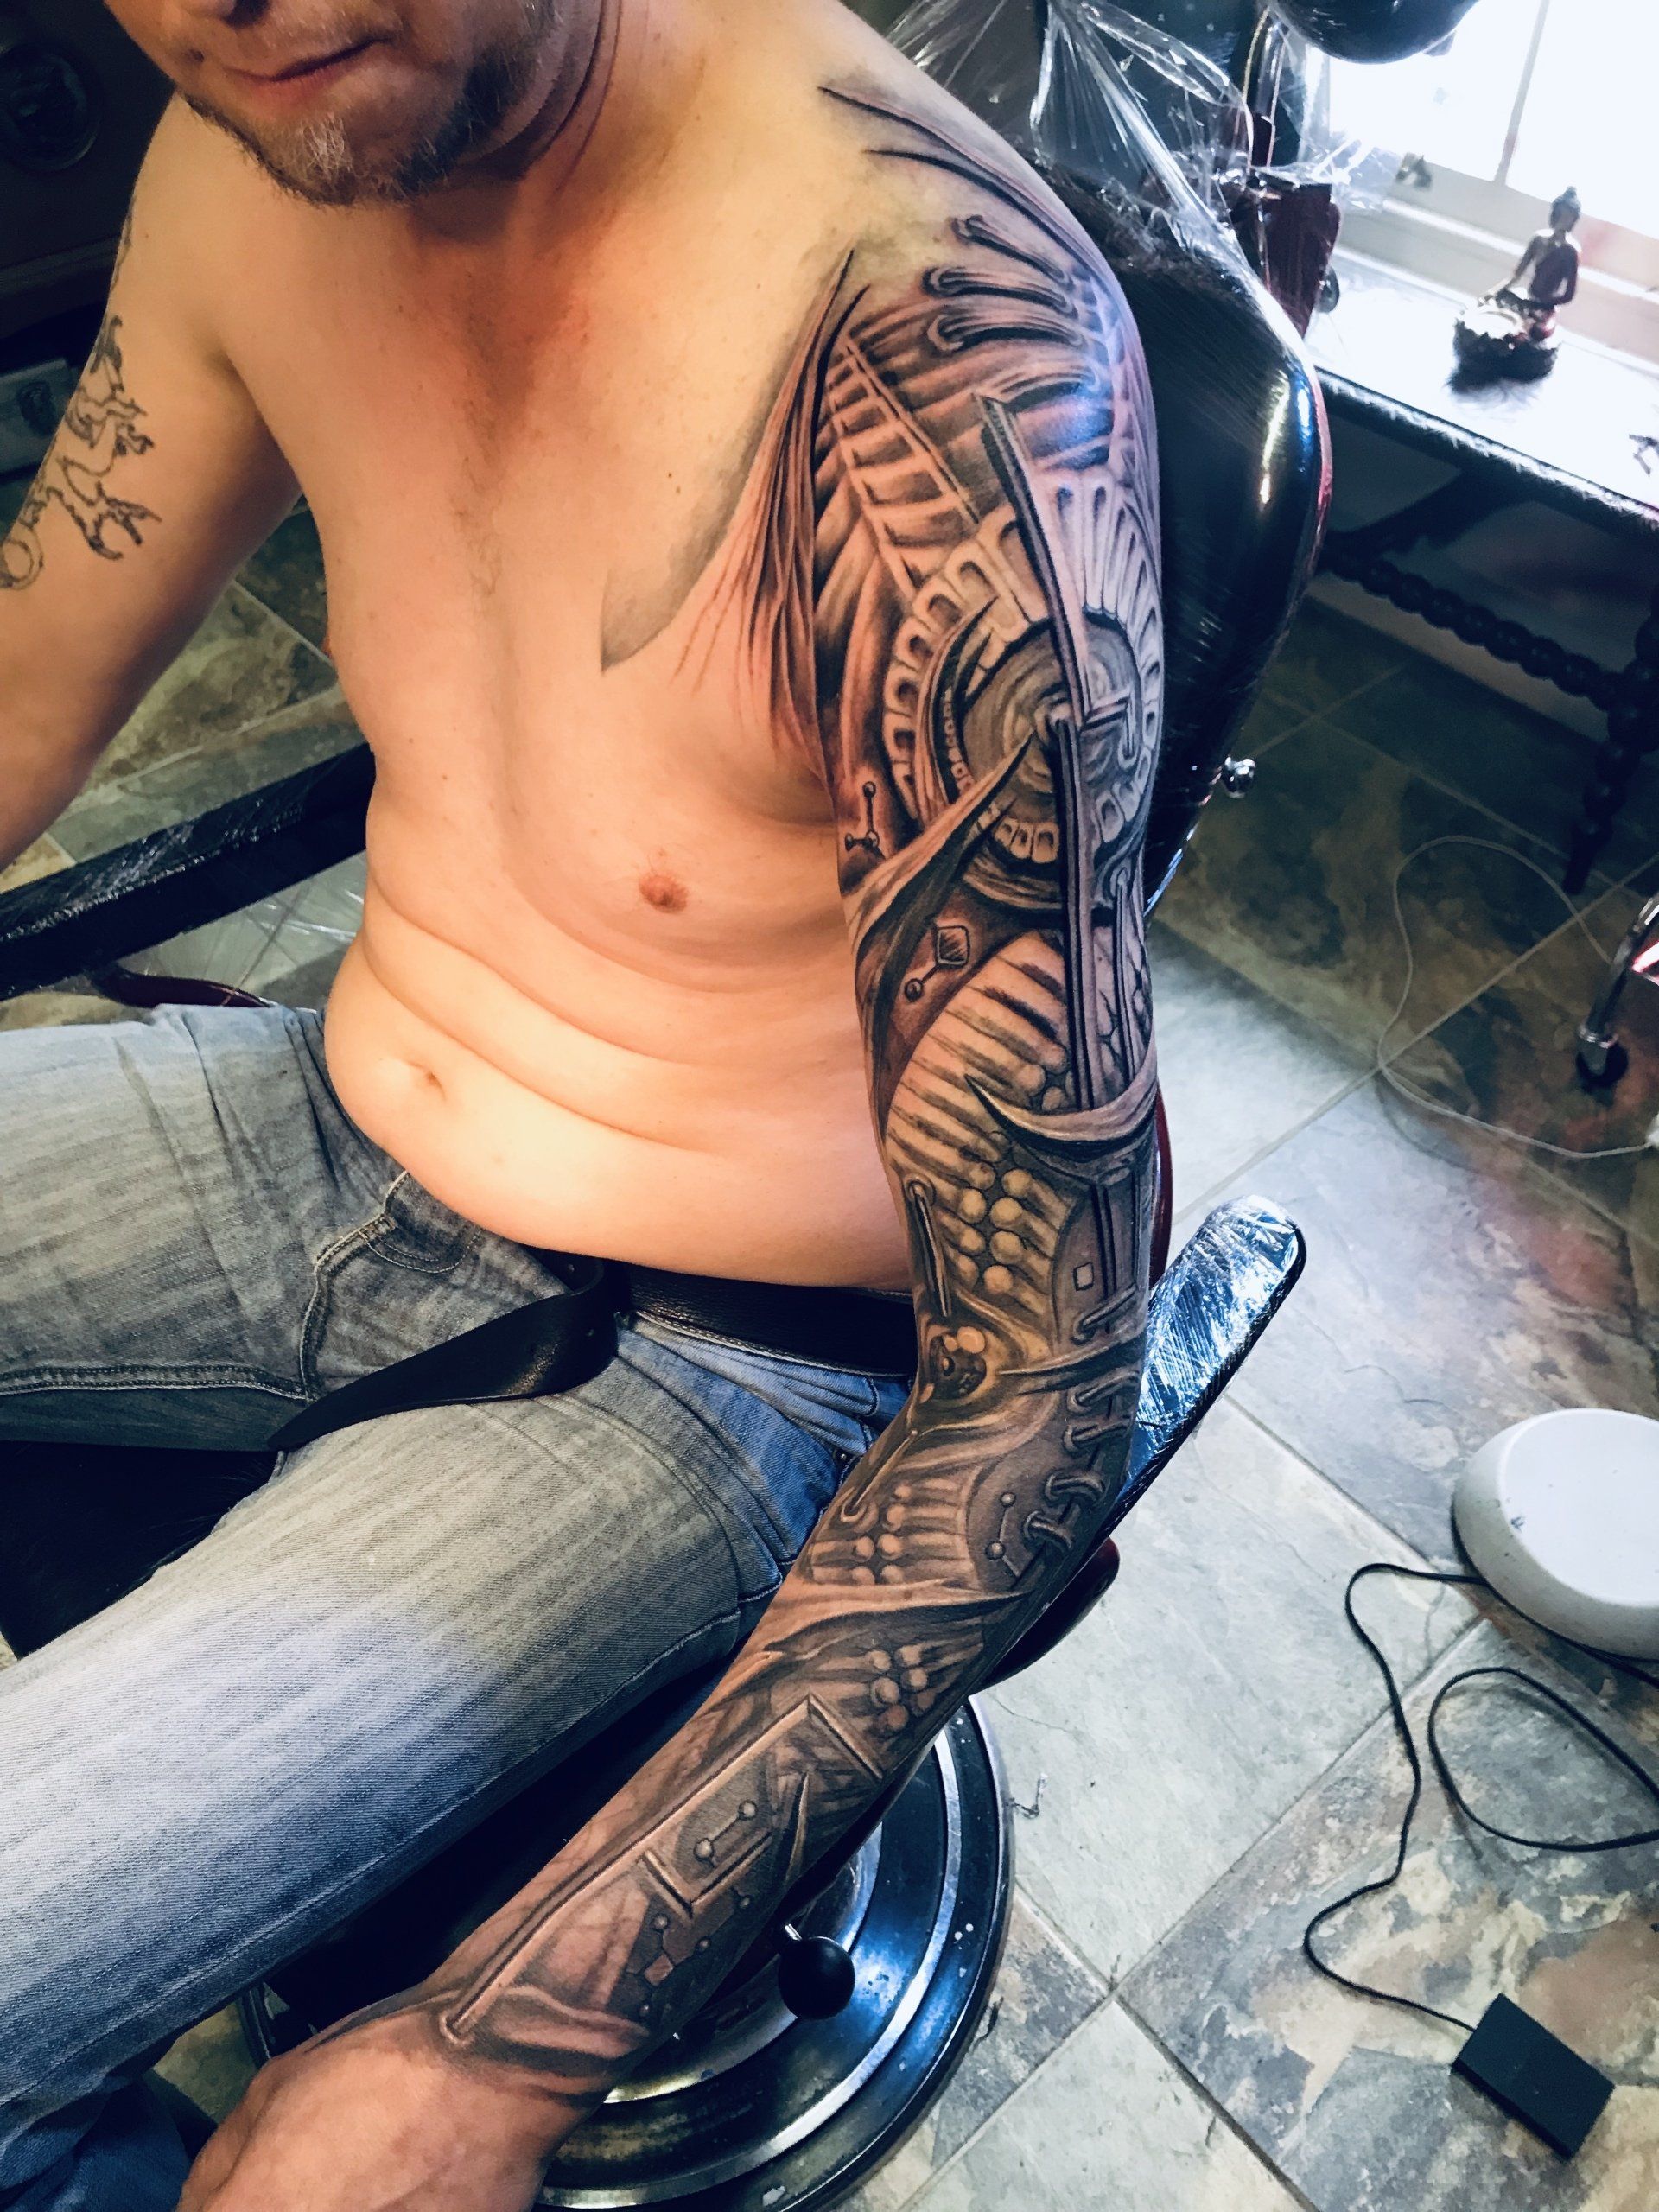 man sitting down with sleeve tattoo